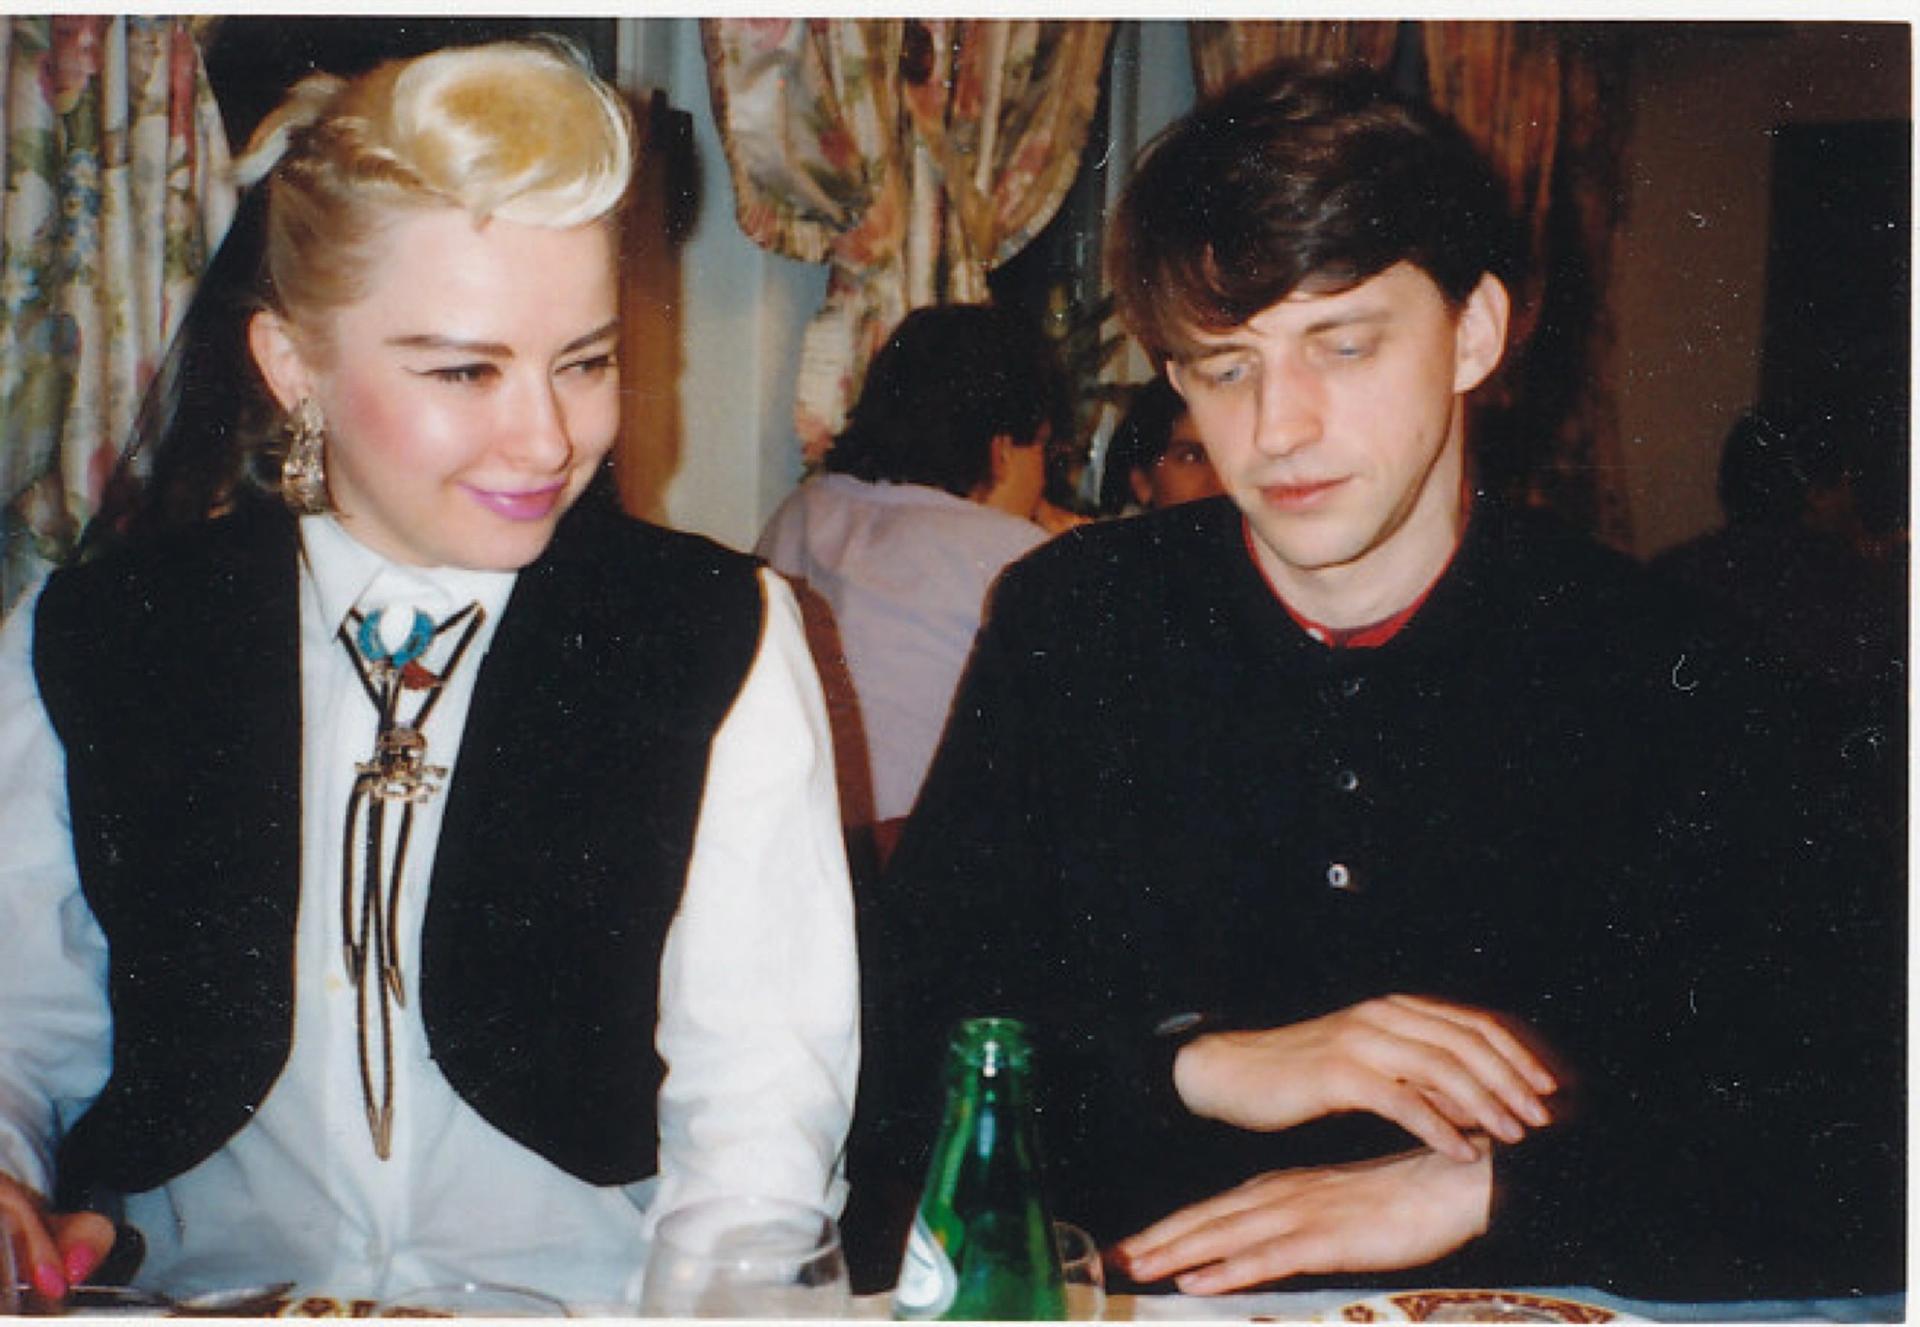 Young Tabea Blumenschein and Wolfgang Müller in West Berlin (1980s).